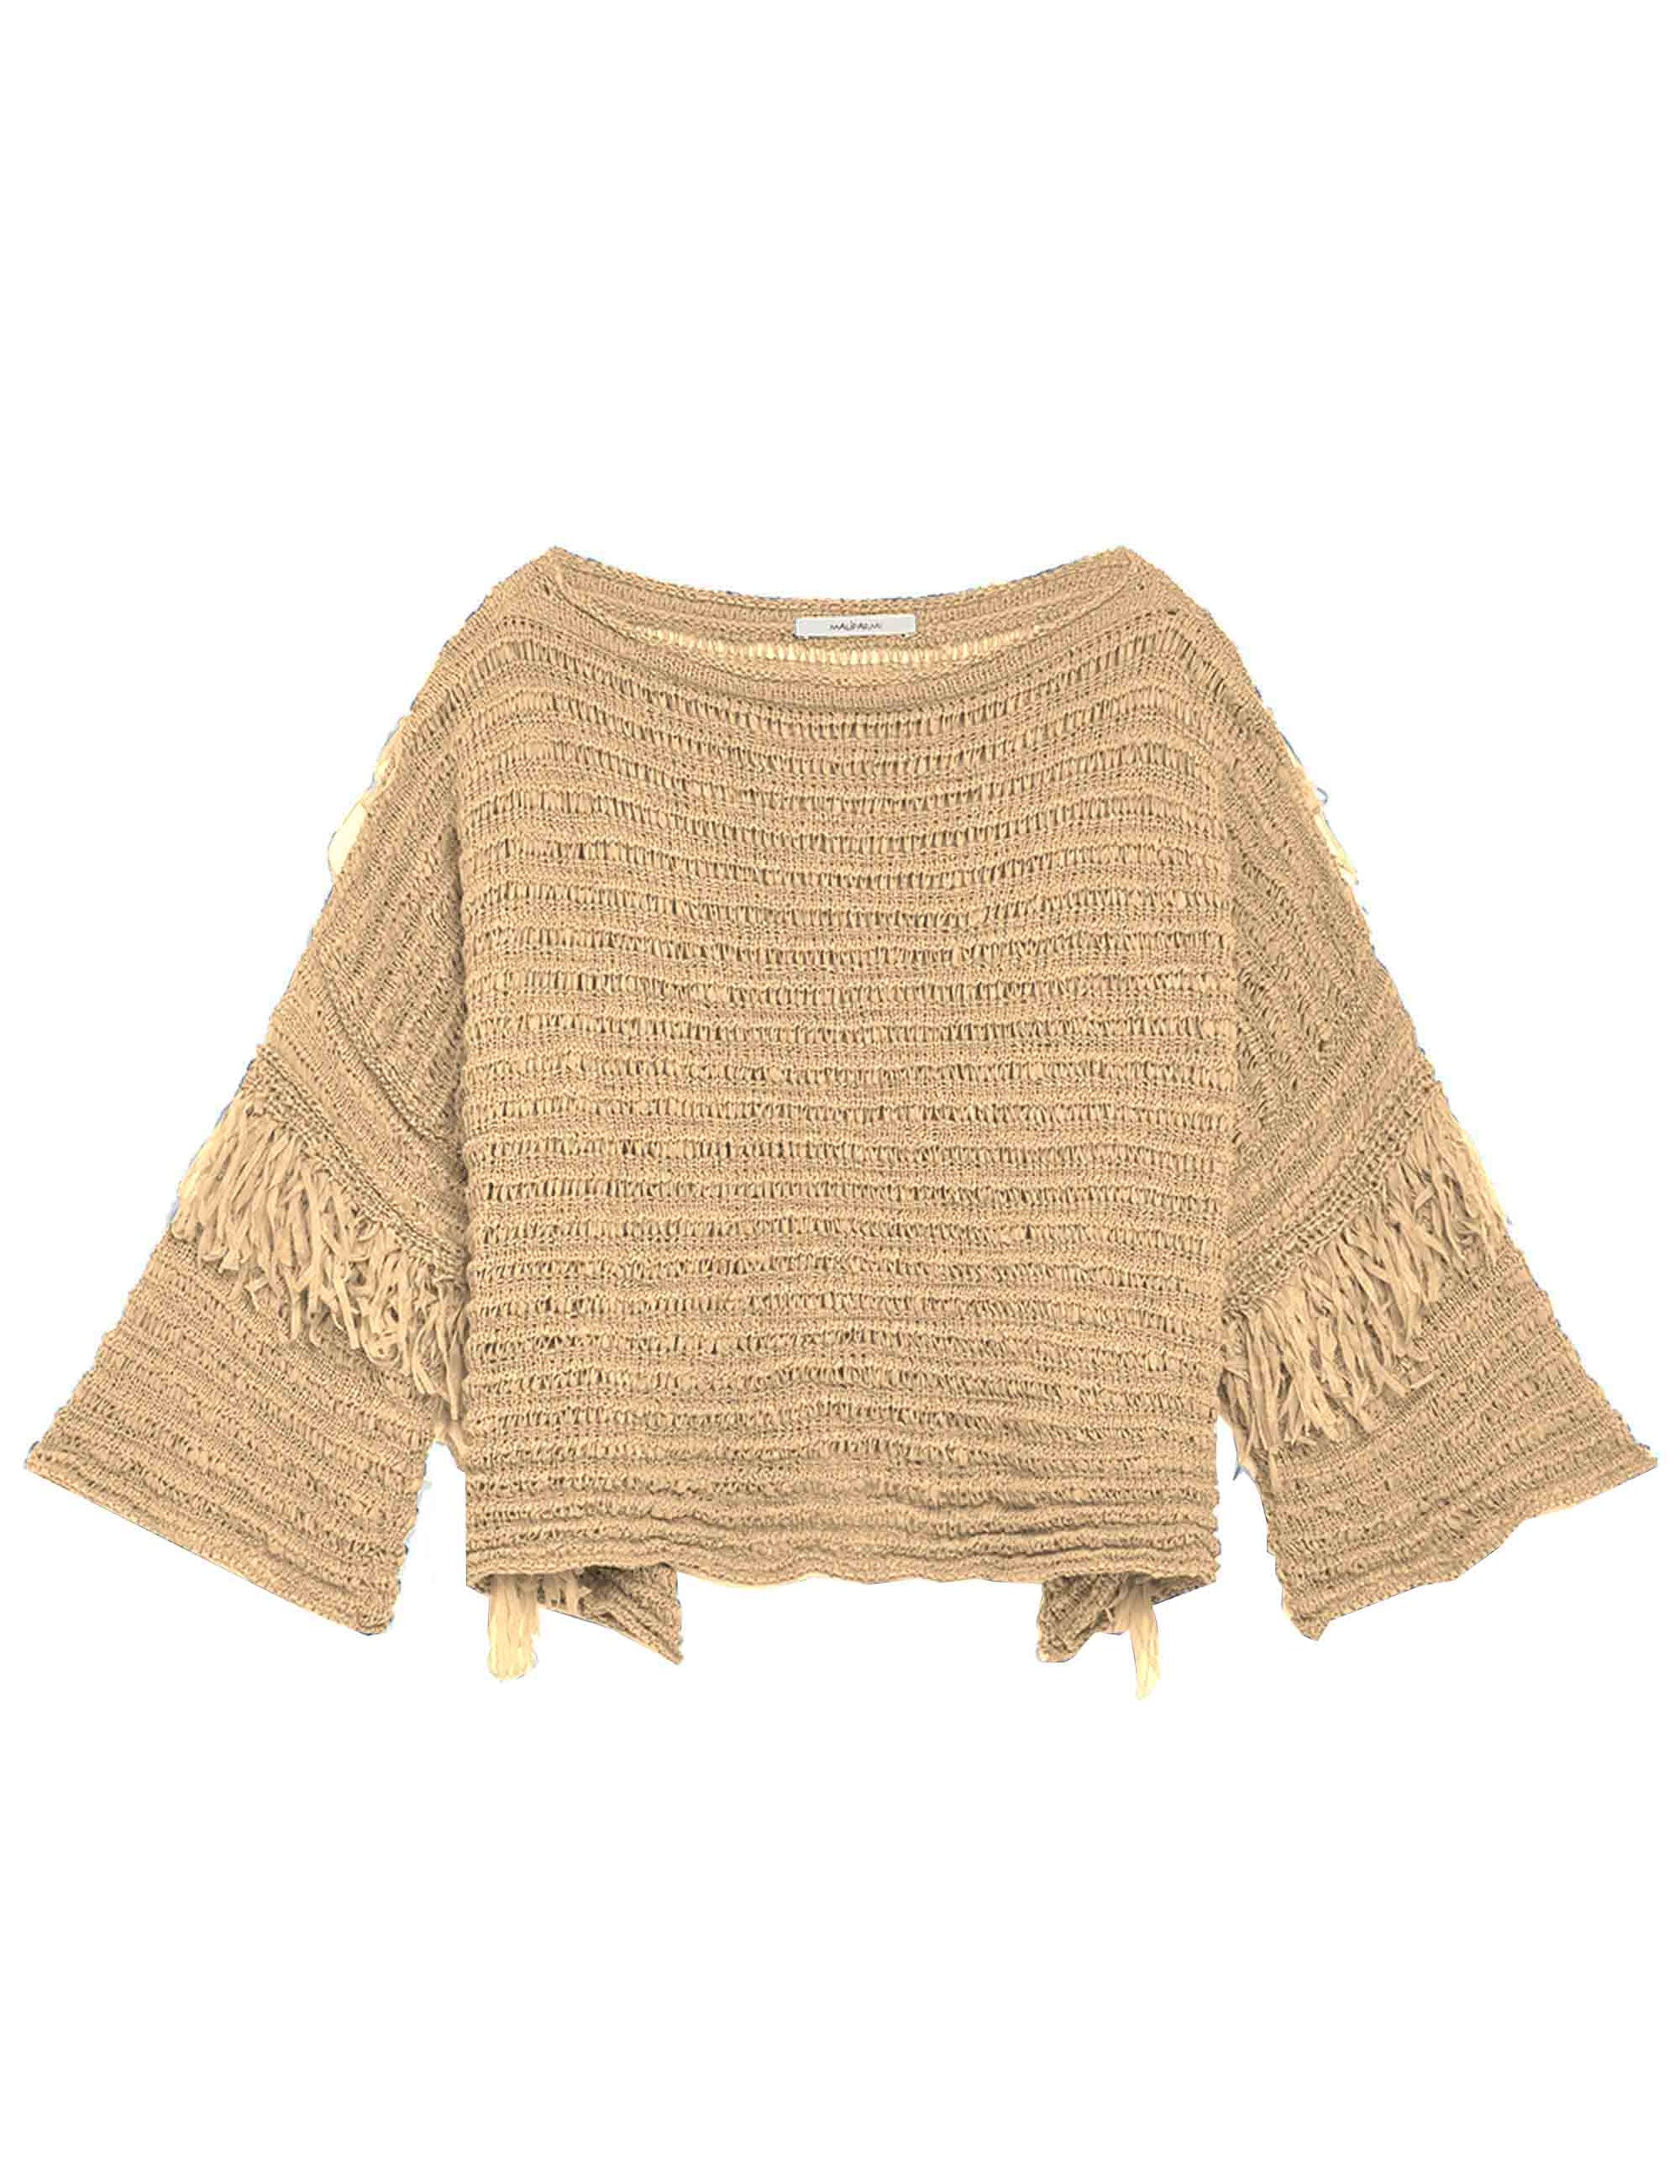 Women's Superlight Ribbon sweaters in beige fabric with 3/4 sleeves and fringes